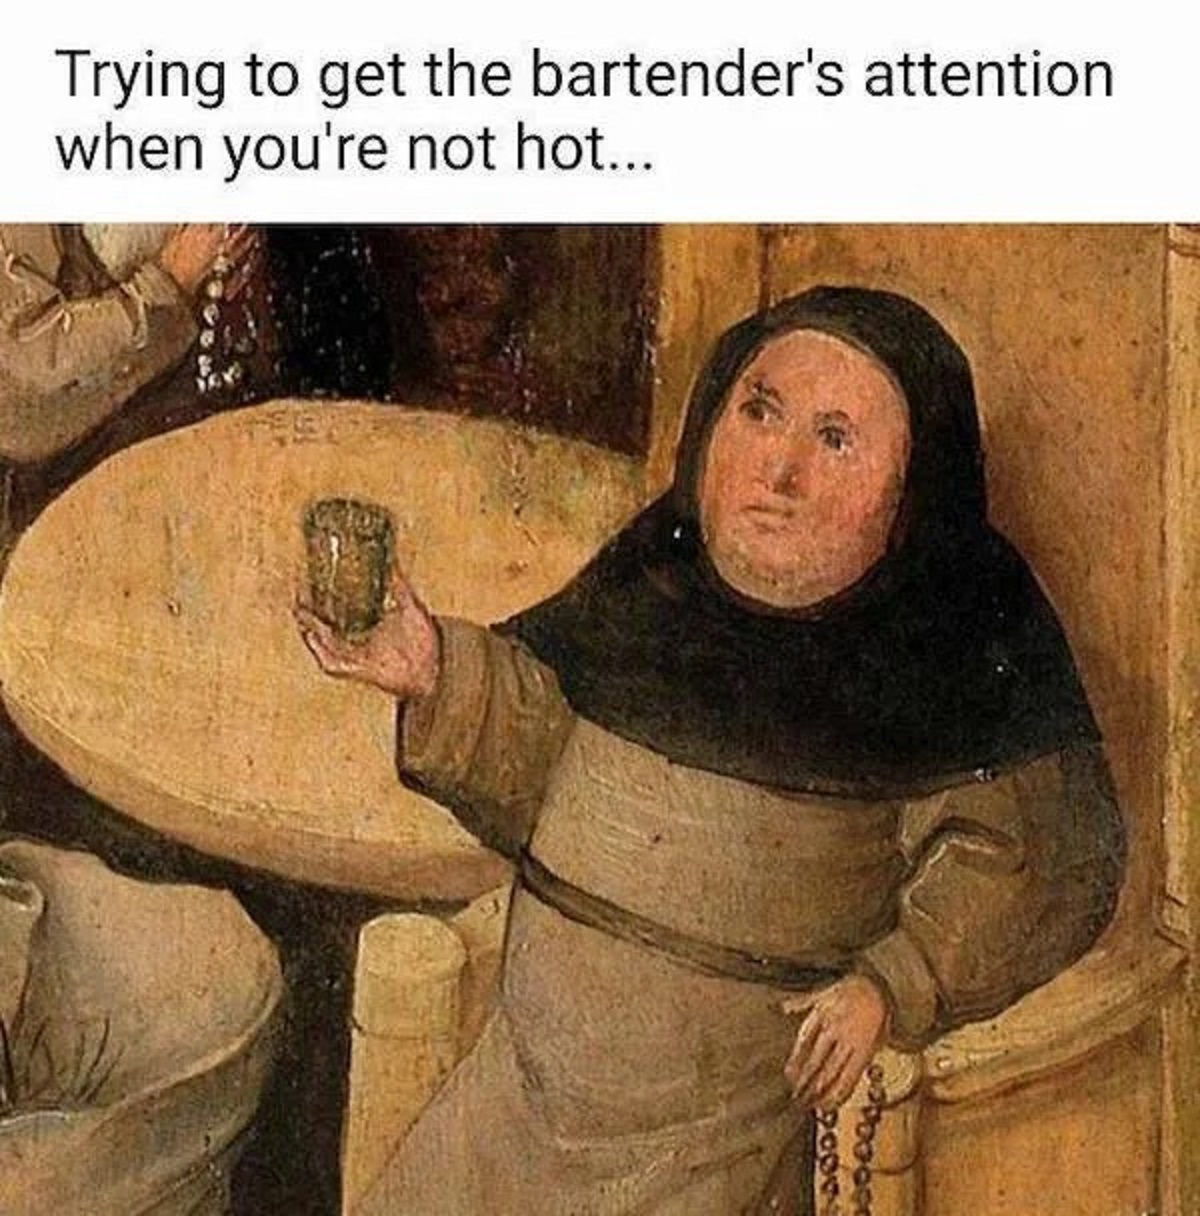 painting - Trying to get the bartender's attention when you're not hot...